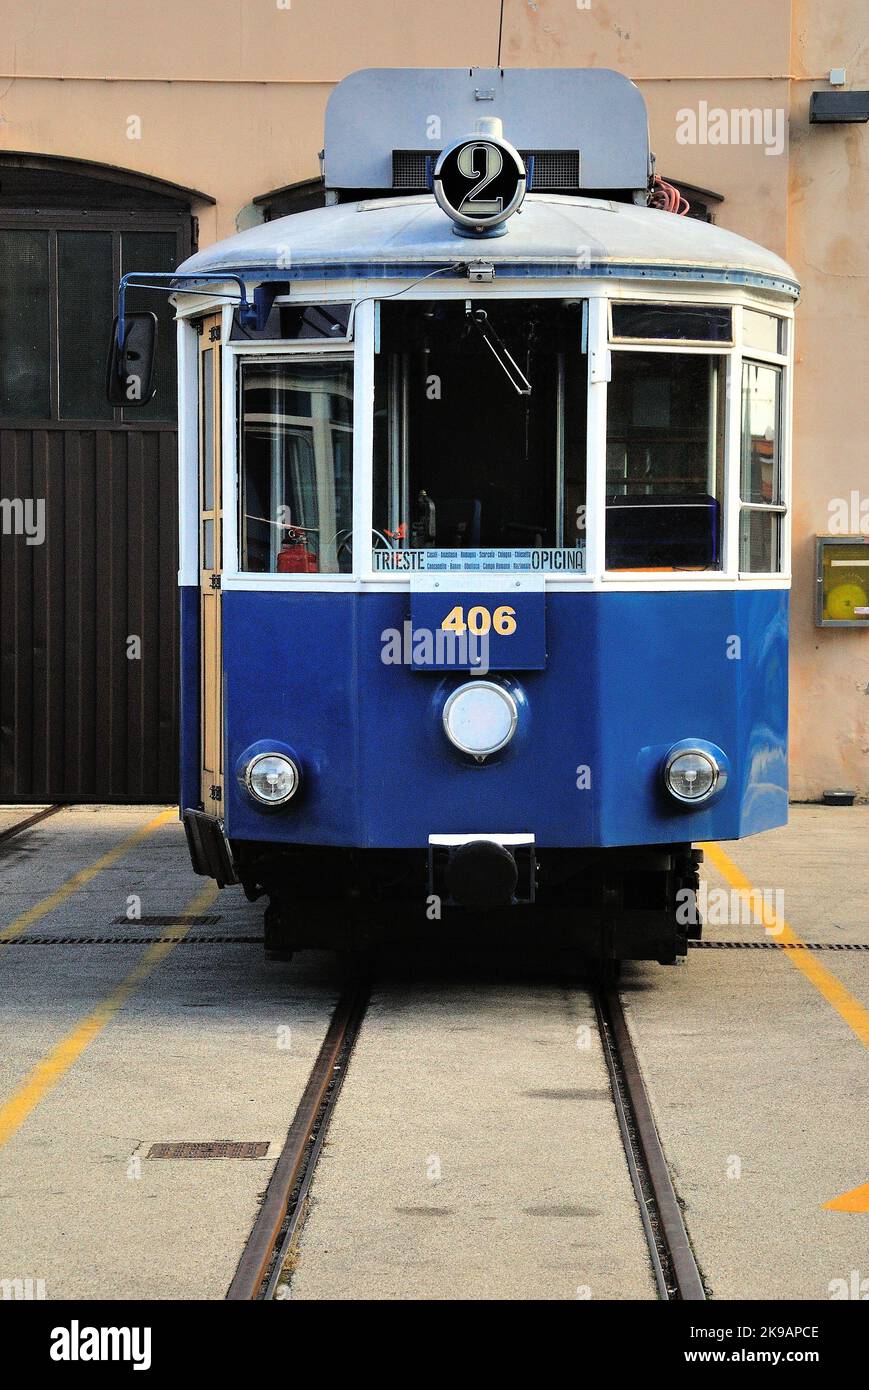 The tram of Opicina is a historic tram of Trieste. It connects the town of Opicina with the city of Trieste, its route is very steep. The Opicina tramway in 2022 celebrates 120 years since its inauguration on 9 October 1902. It is the oldest functioning tramway in Europe. The tram has been stopped since 08/16/2016 following an accident. It will probably resume functioning in 2023. Stock Photo